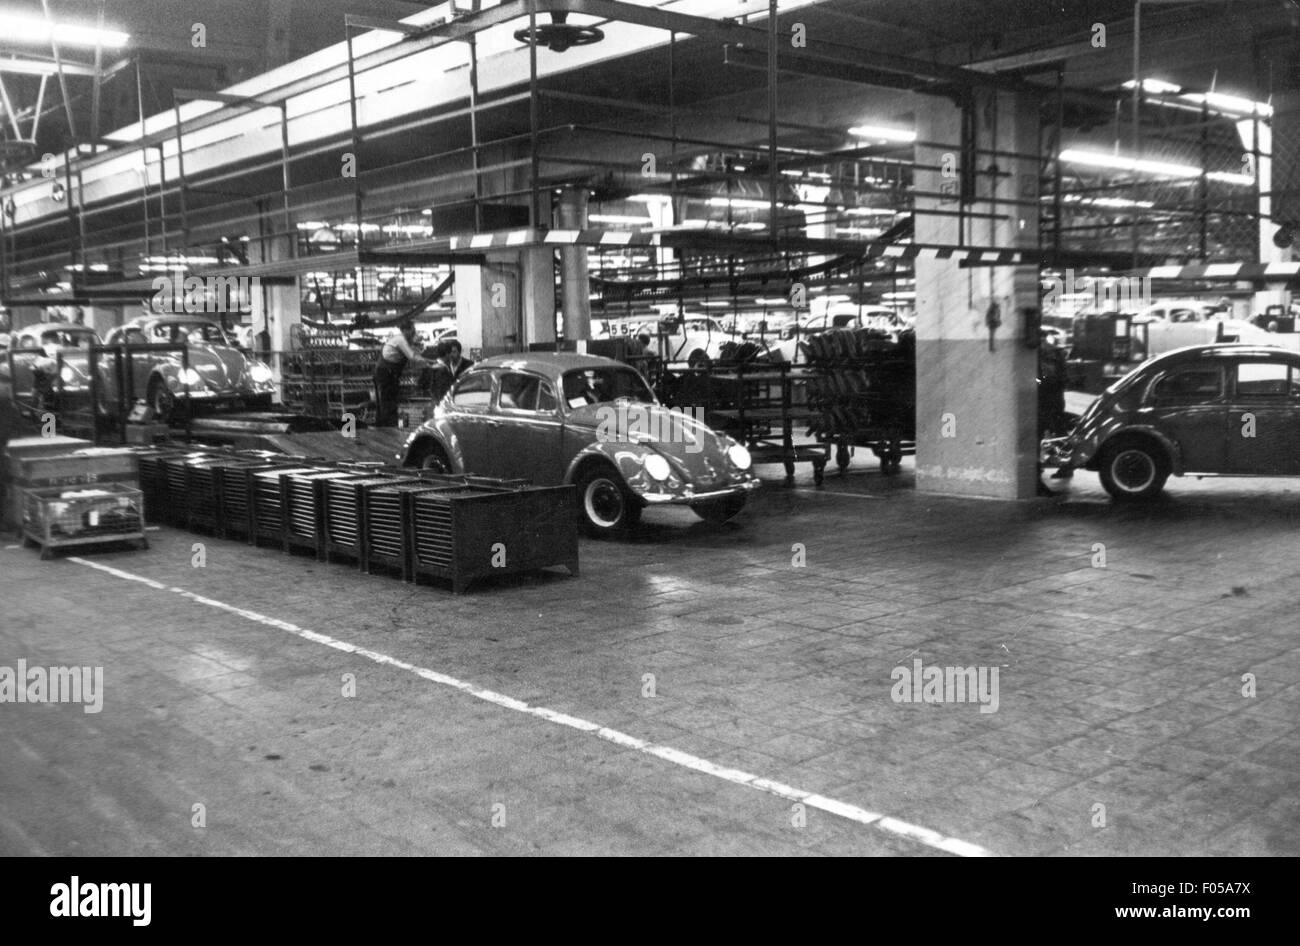 industry, car industry, production of the VW beetle, 1960s, Additional-Rights-Clearences-Not Available Stock Photo